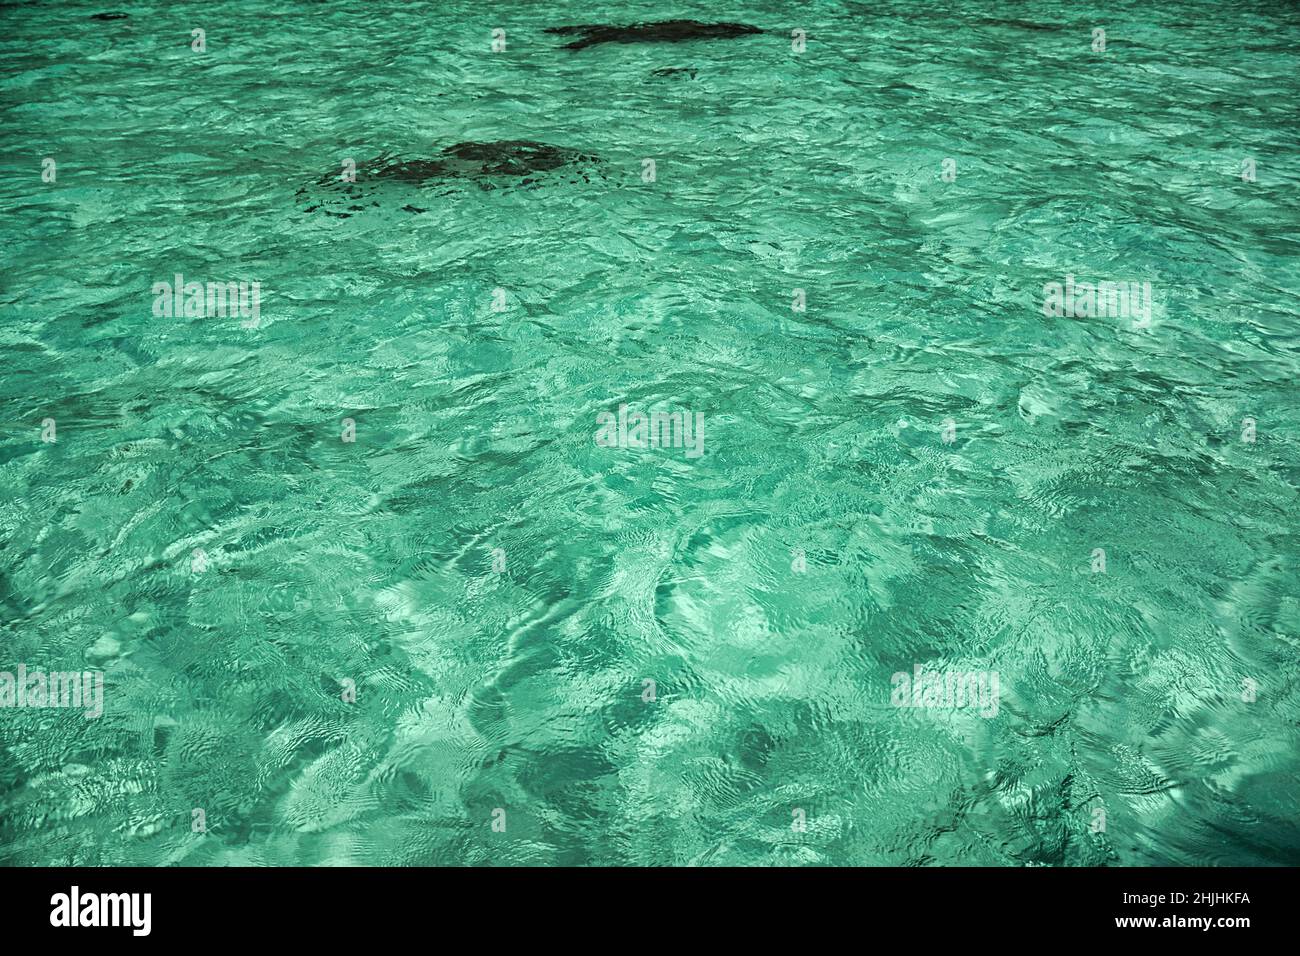 Turquoise crystal clear water on the shores of the magical island Koh Lipe Stock Photo